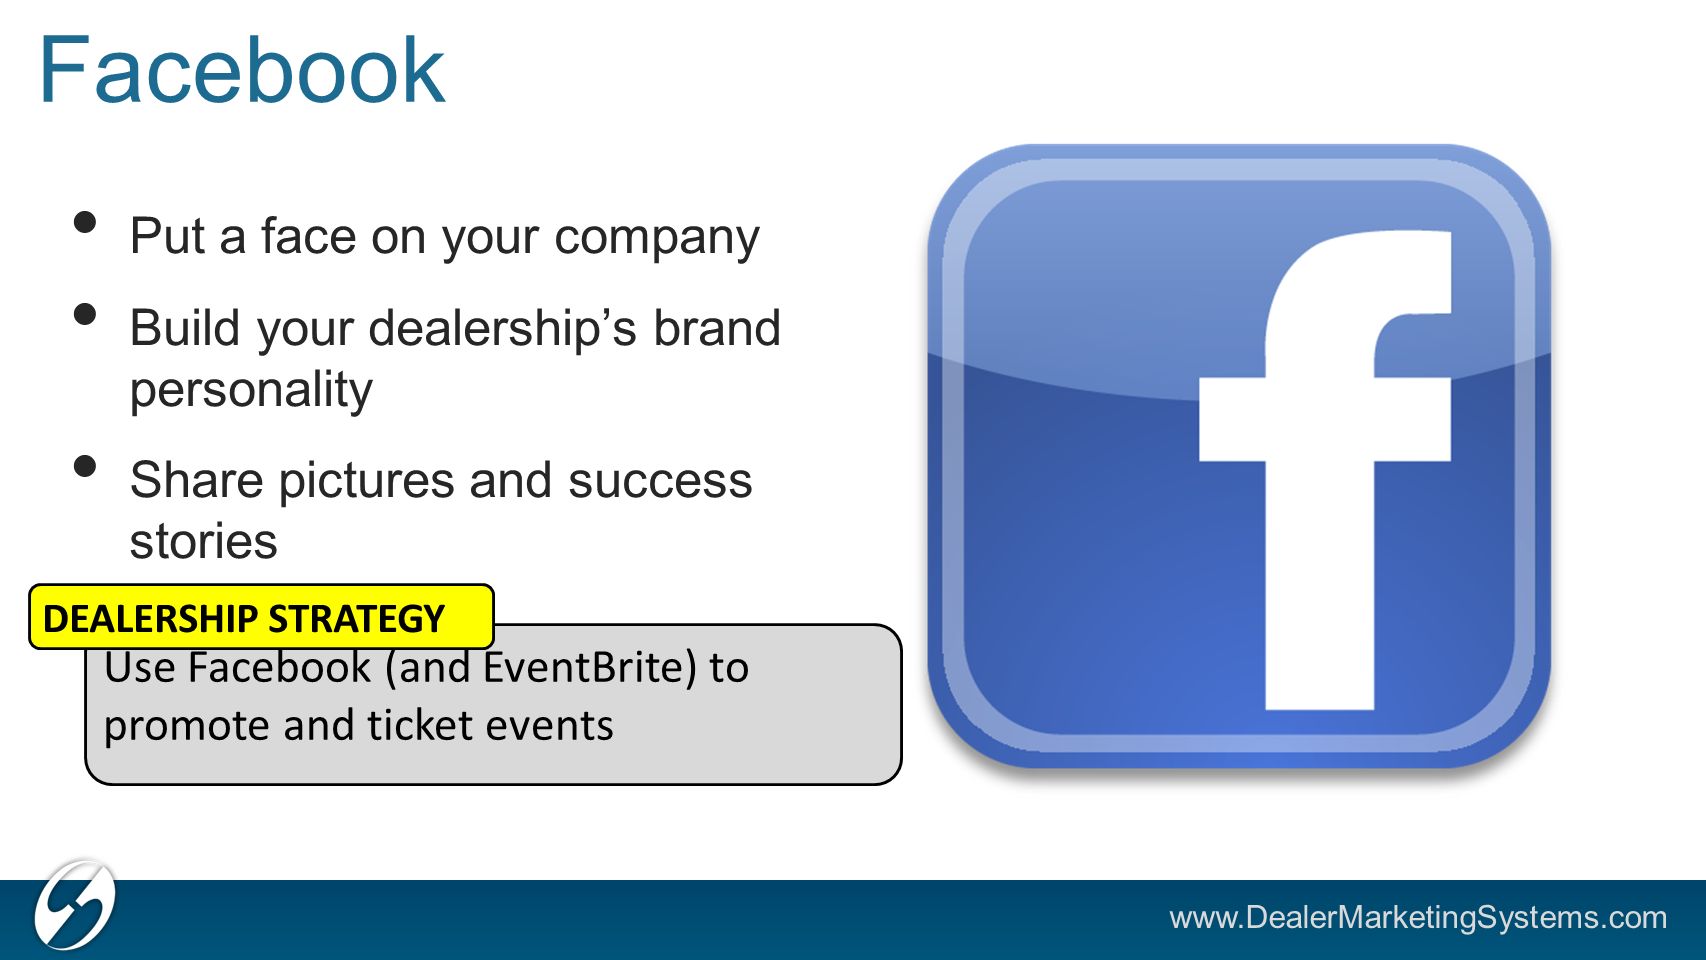 Facebook Put a face on your company Build your dealership’s brand personality Share pictures and success stories Use Facebook (and EventBrite) to promote and ticket events DEALERSHIP STRATEGY